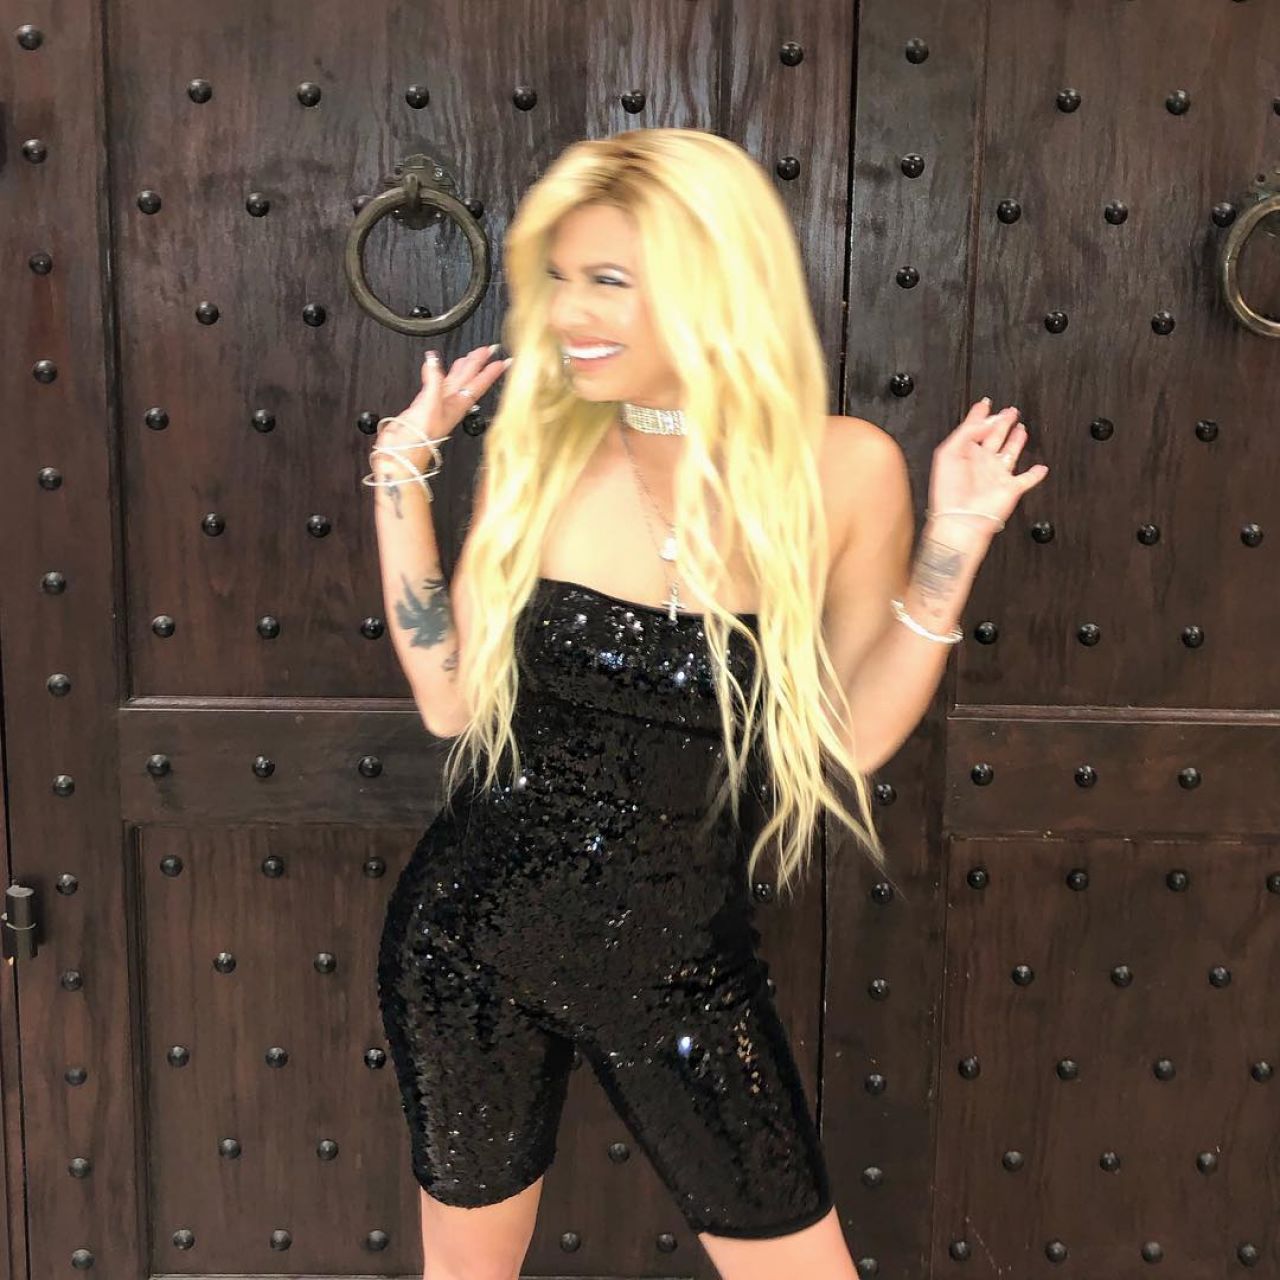 Chanel West Coast - Personal Pics 01/02/2019.